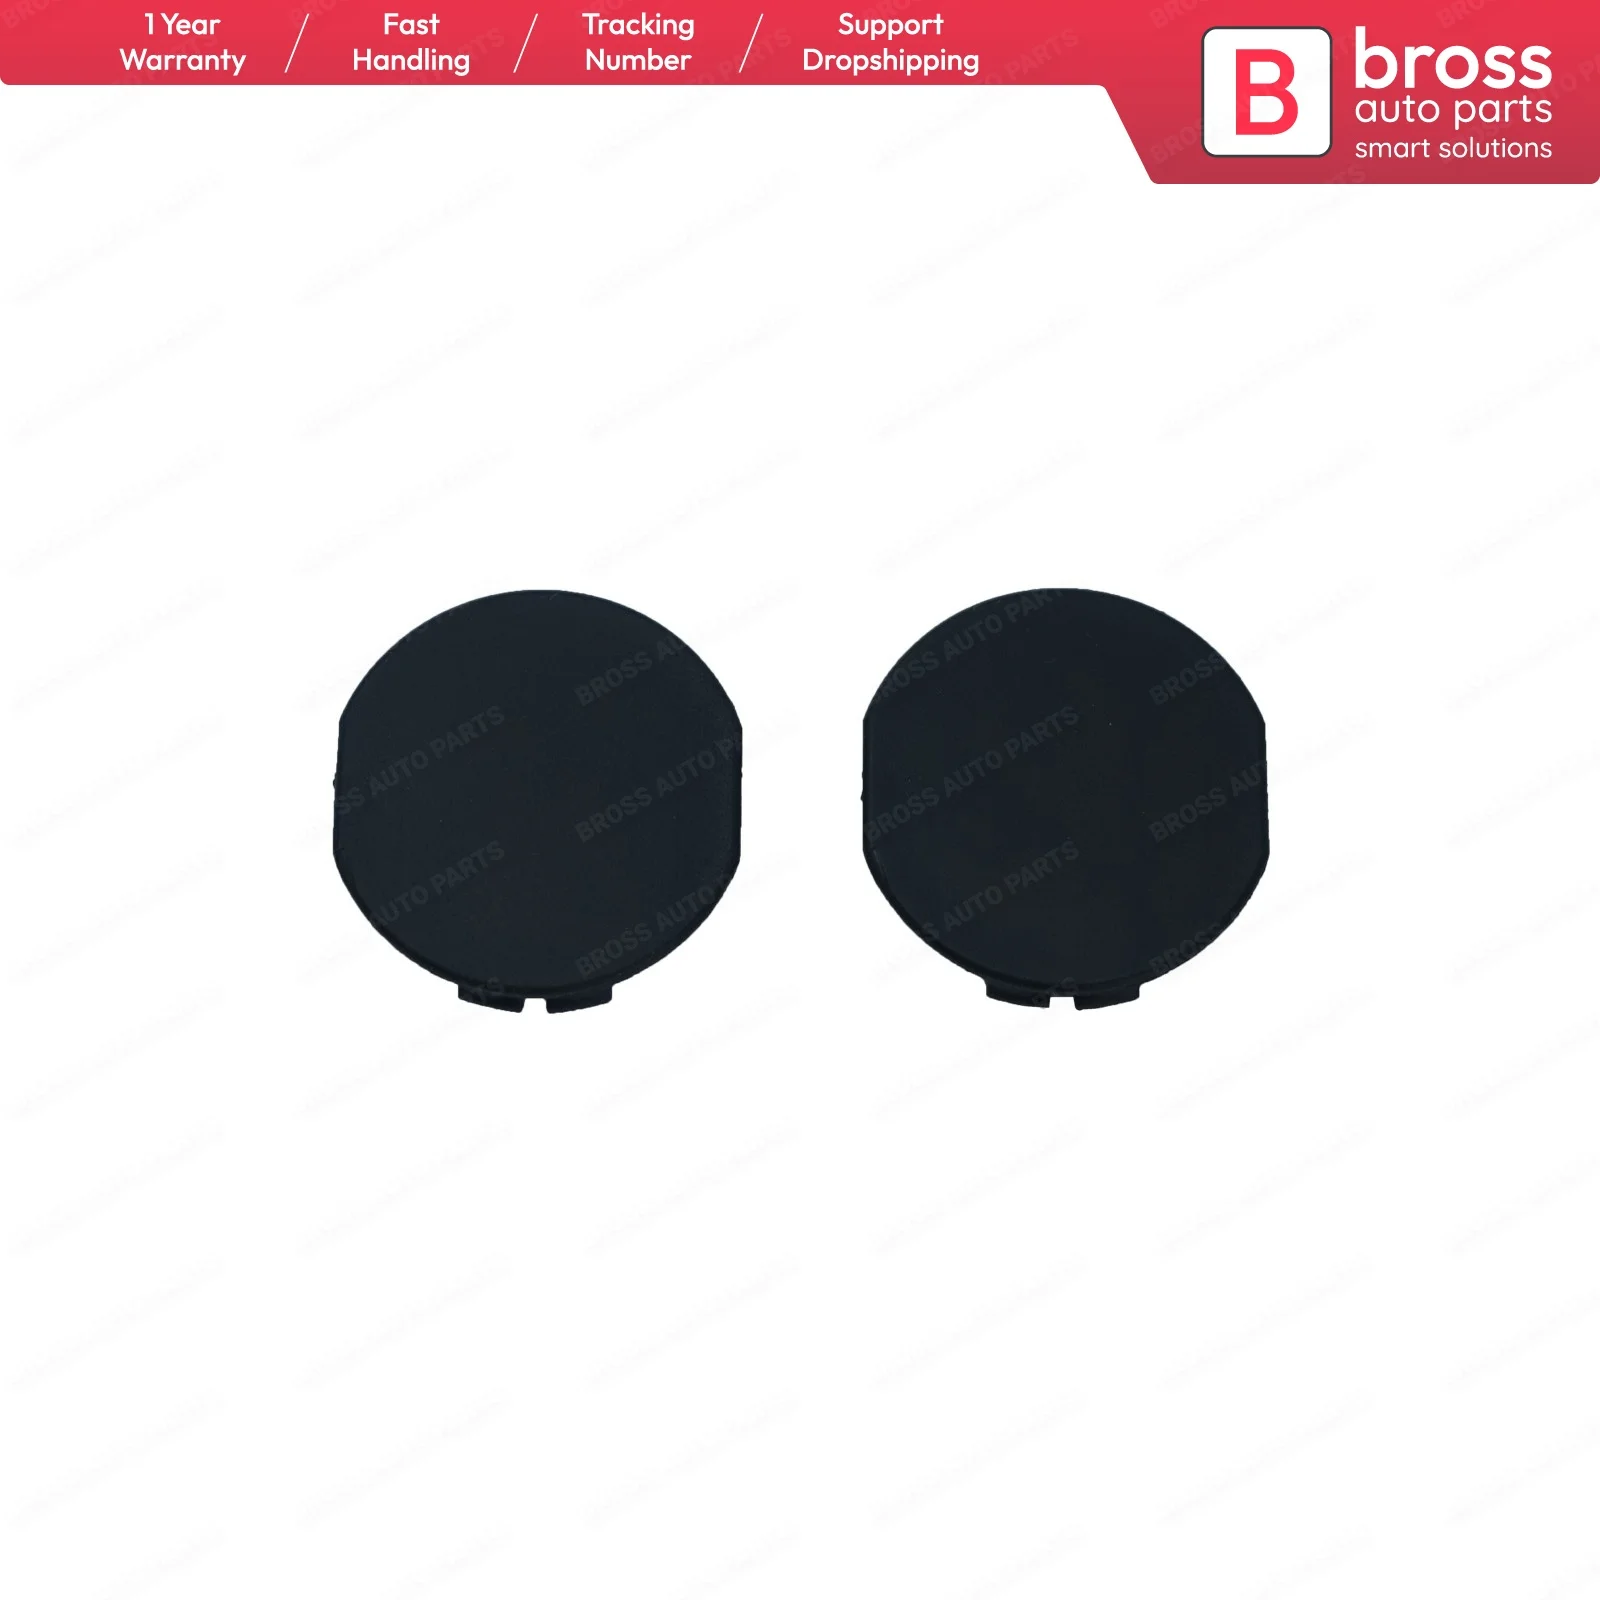 

Bross Auto Parts BSP881FBA 2 Pcs Engine Cover Bolt Cap 06 A103937 for VW Seat Skoda Audi Fast Shipment Ship from France